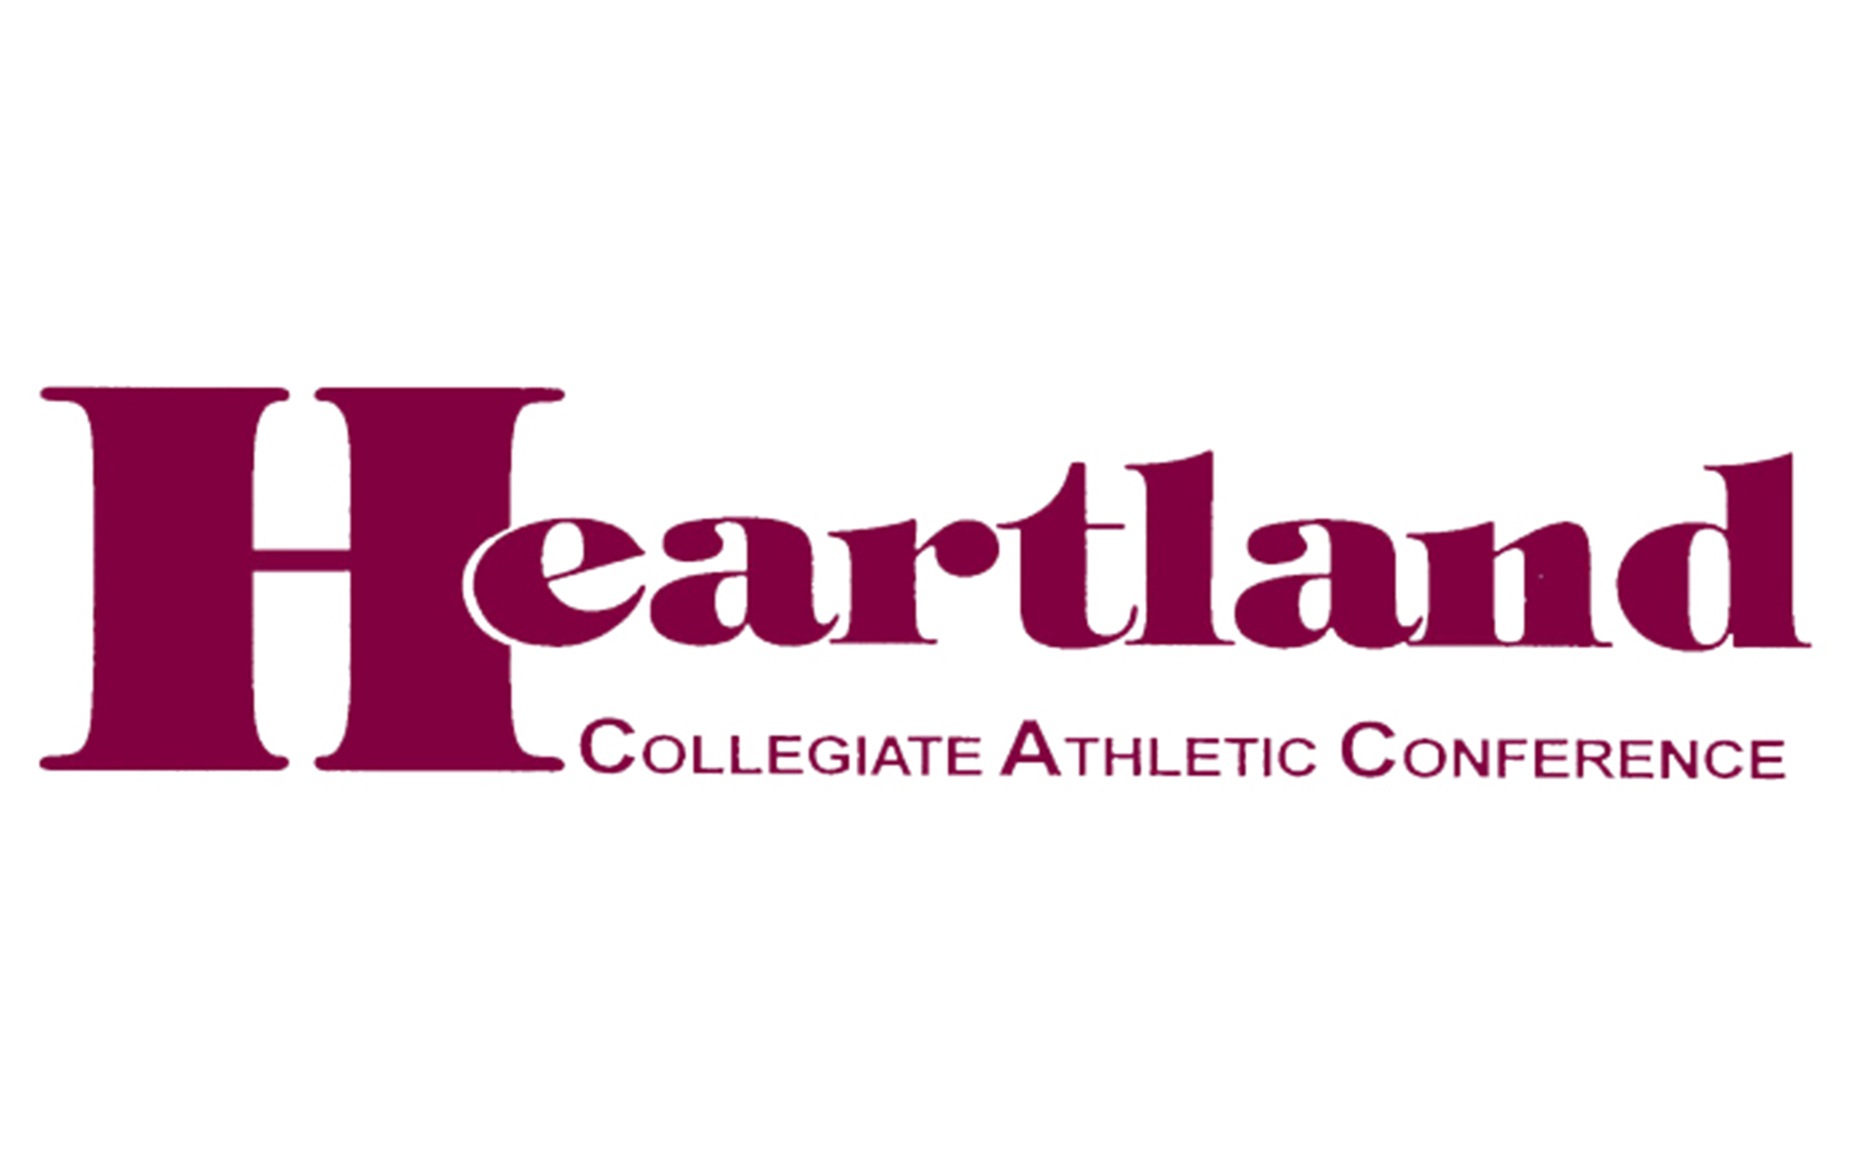 Defiance Has 22 Student-Athletes Named Academic All-HCAC